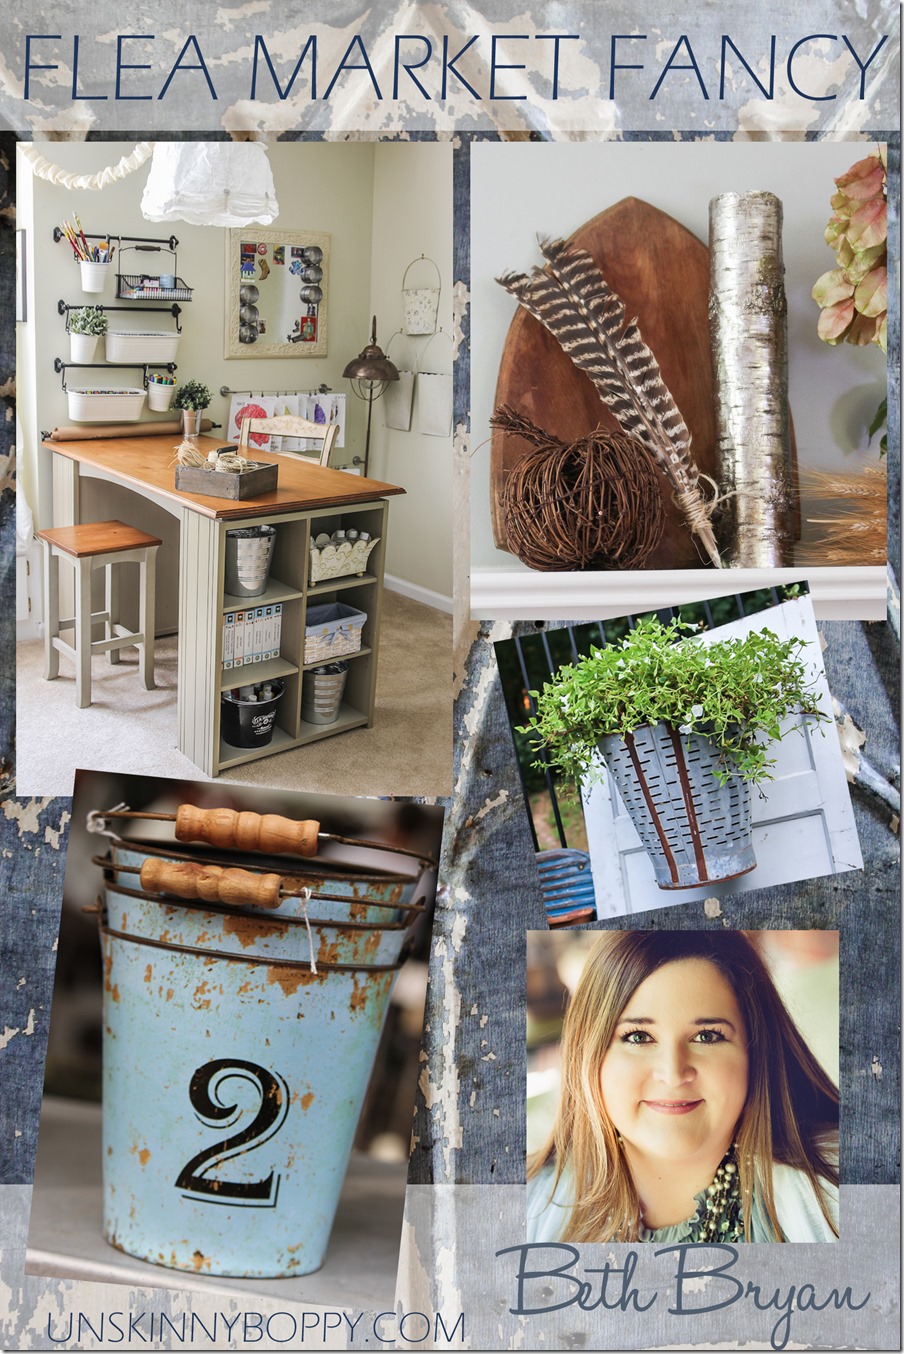 Flea Market Fancy style- come see how a vintage blogger assembles her signature style using reclaimed and found objects.